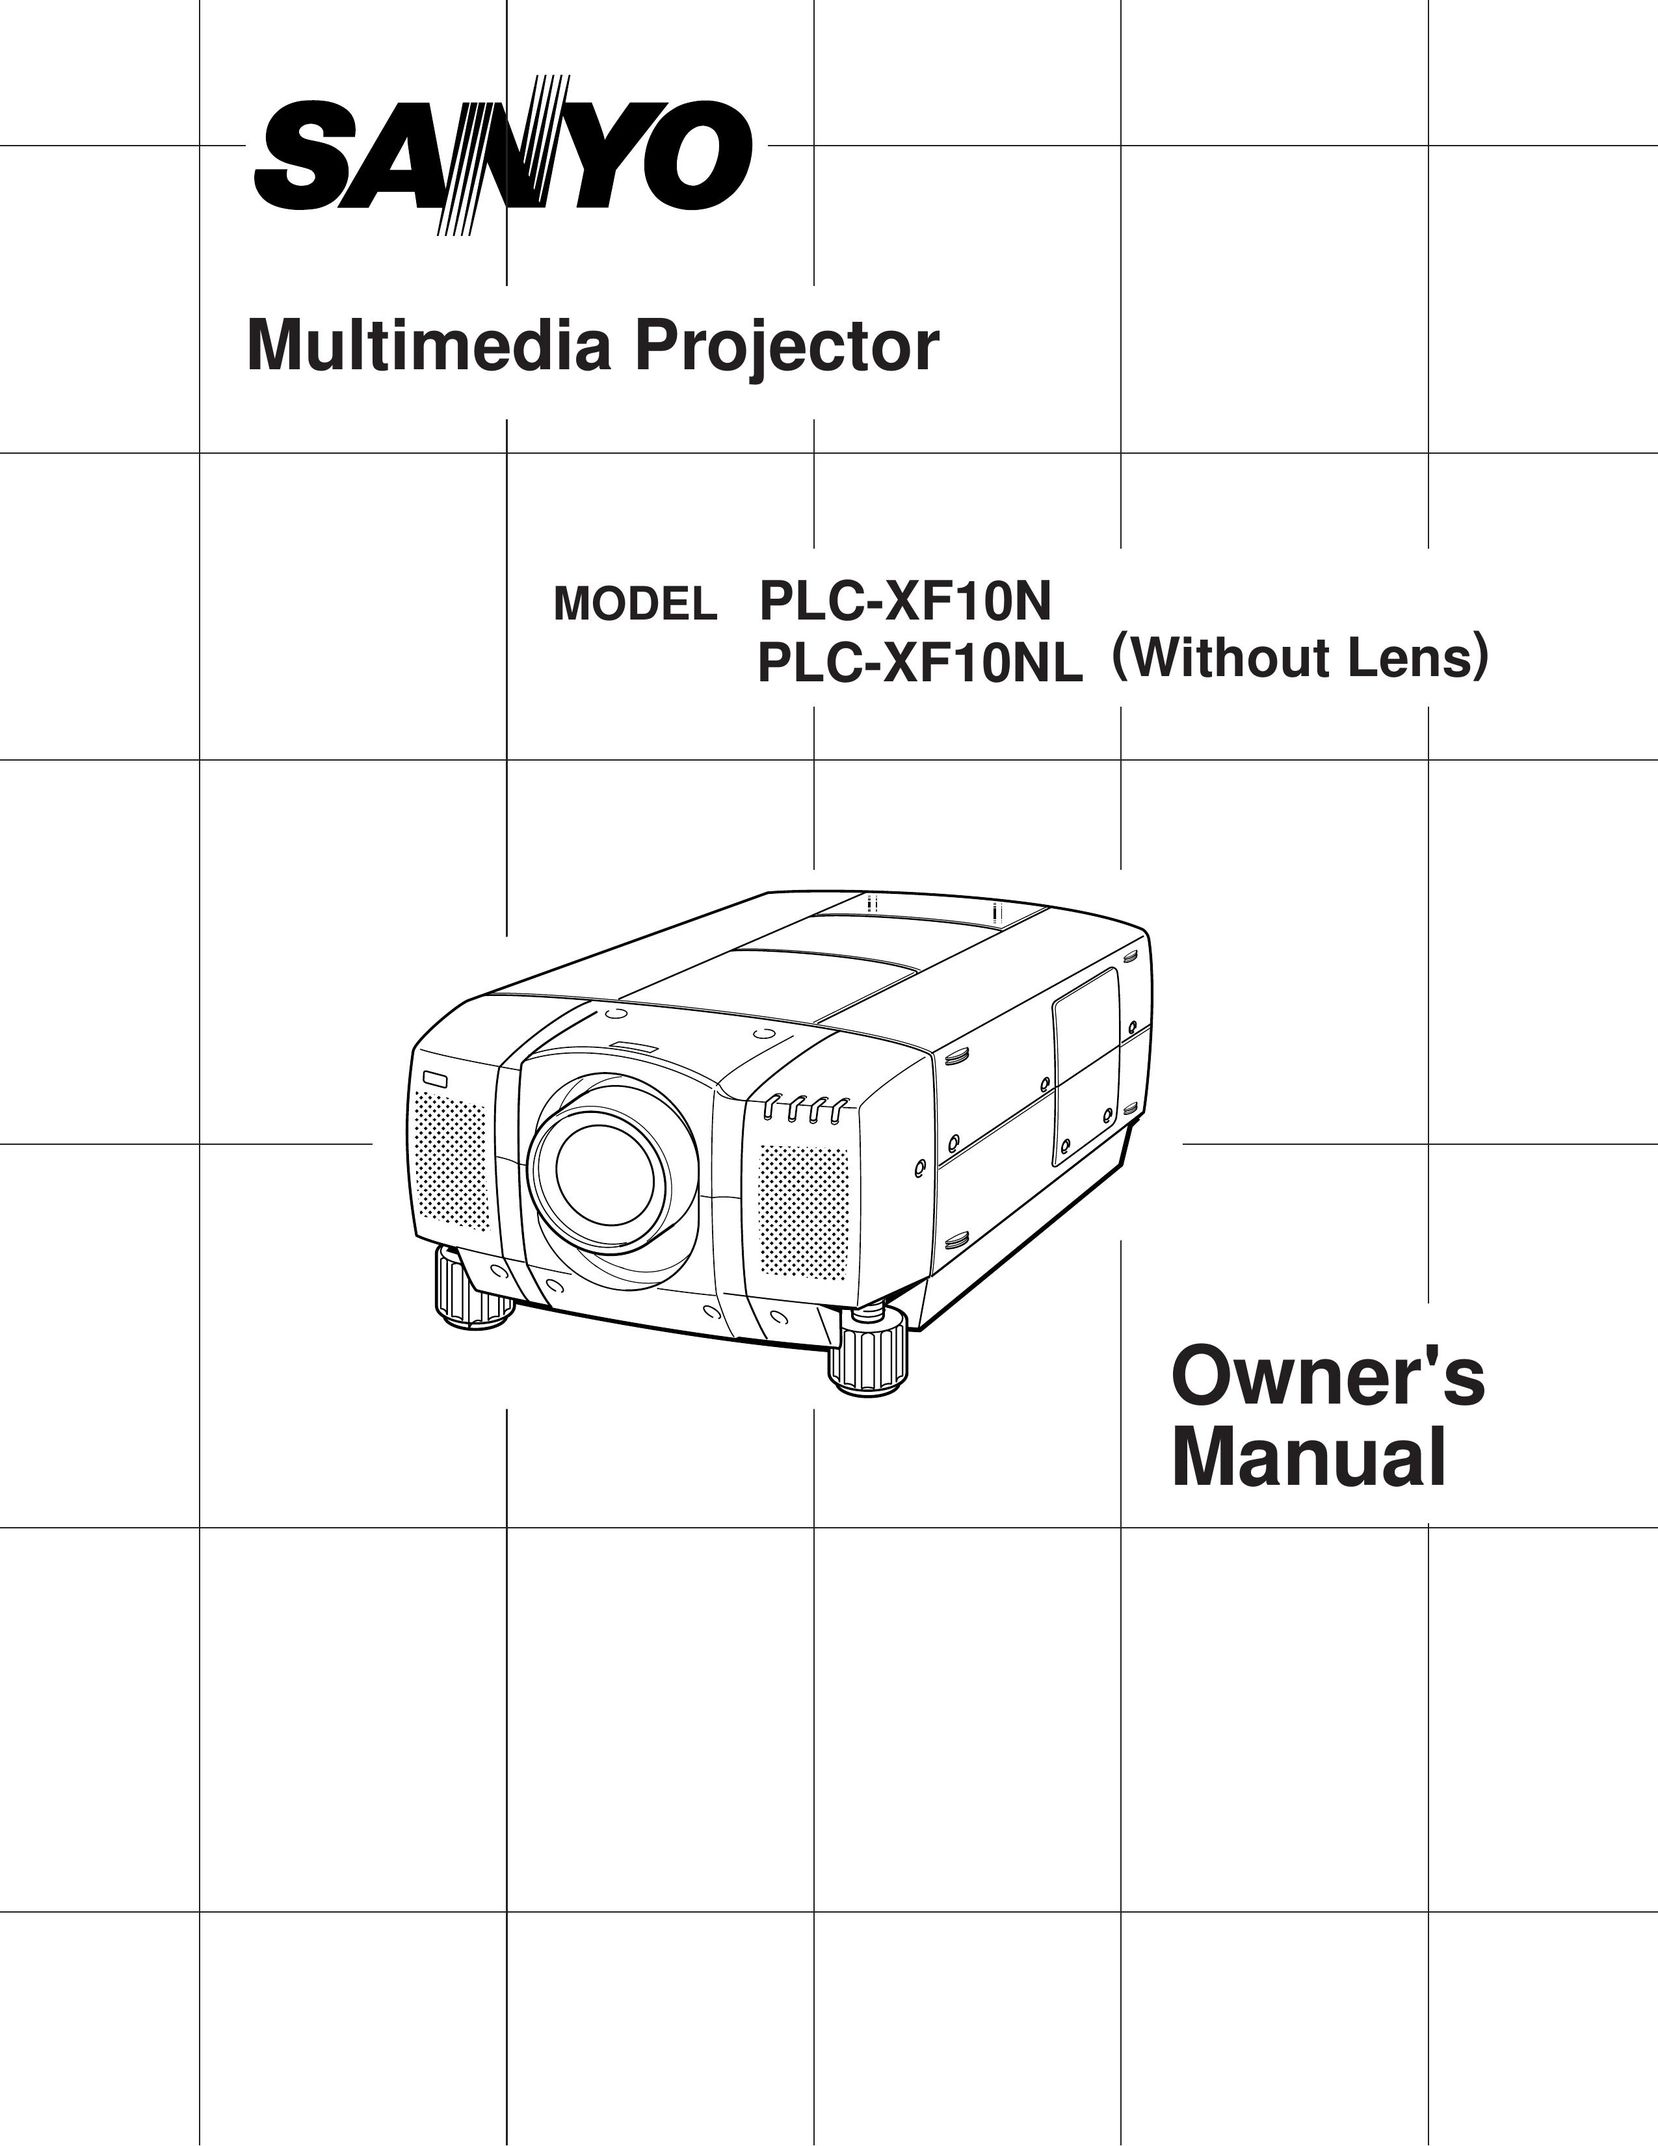 Fisher PLC-XF10NL (Without Lens), PLC-XF10N Projector User Manual